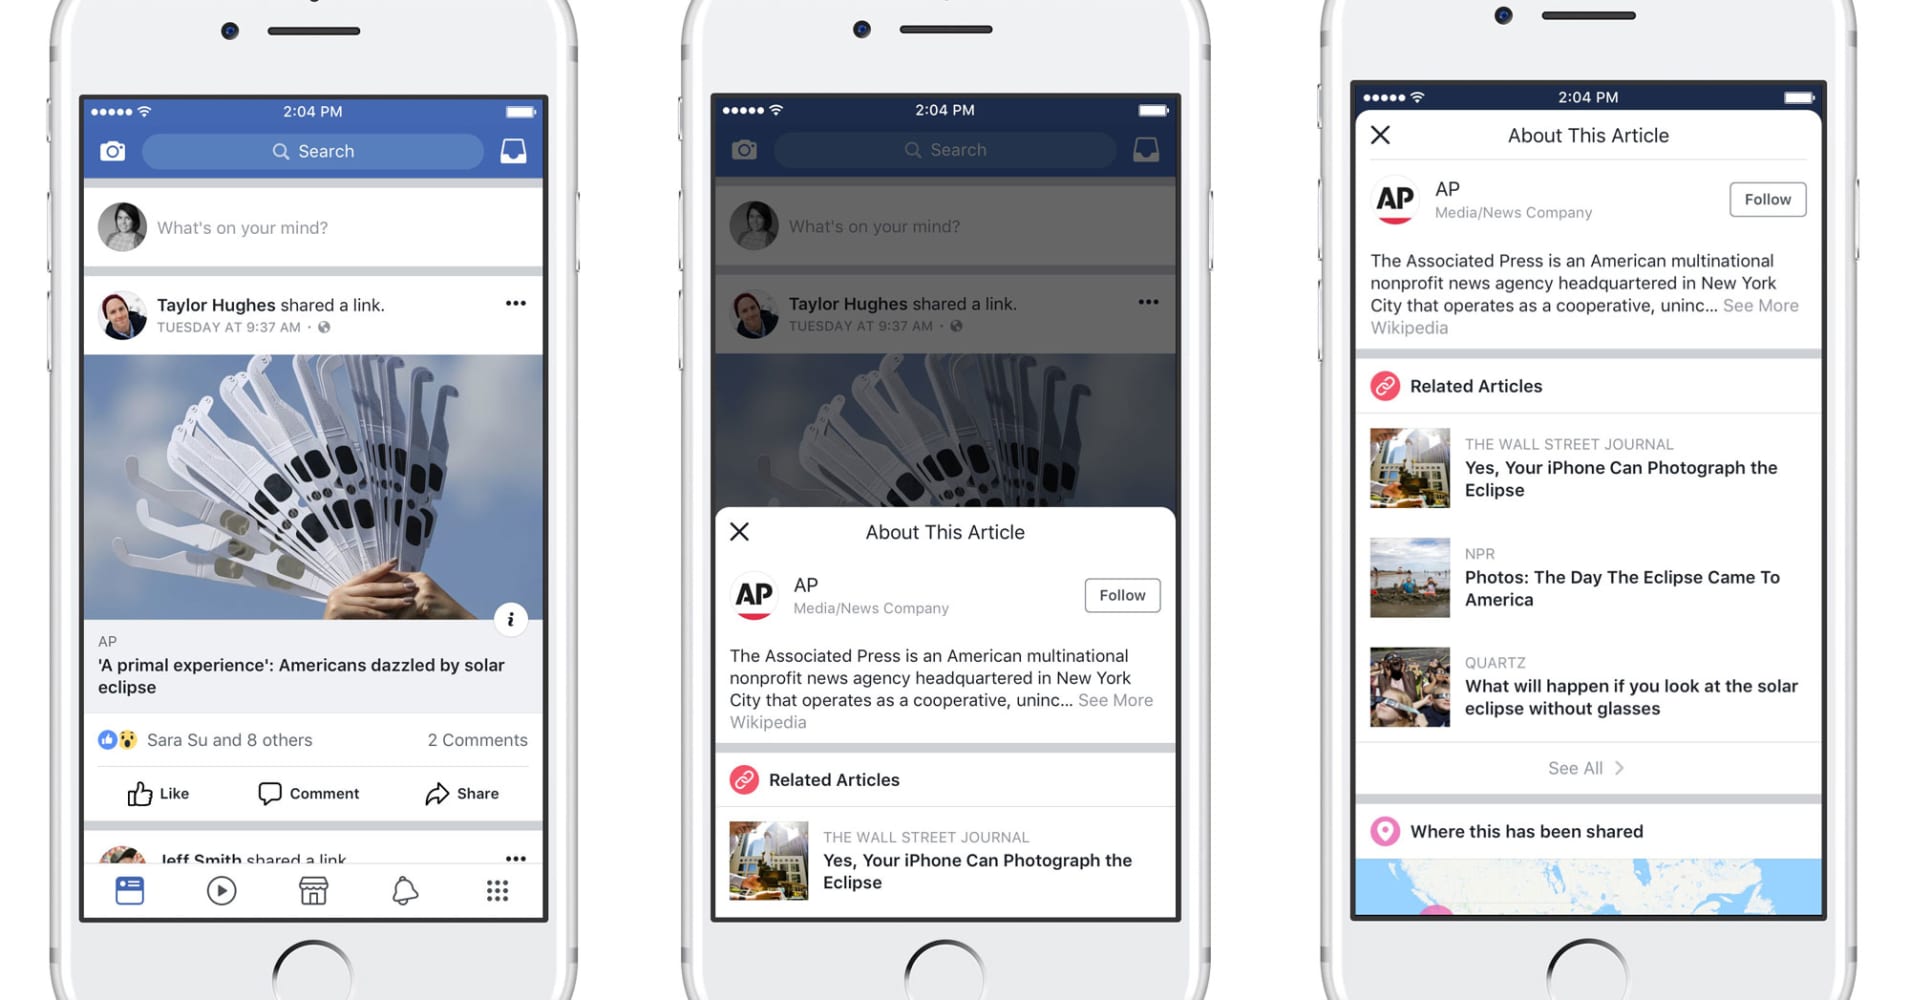 Facebook will test adding context to news stories